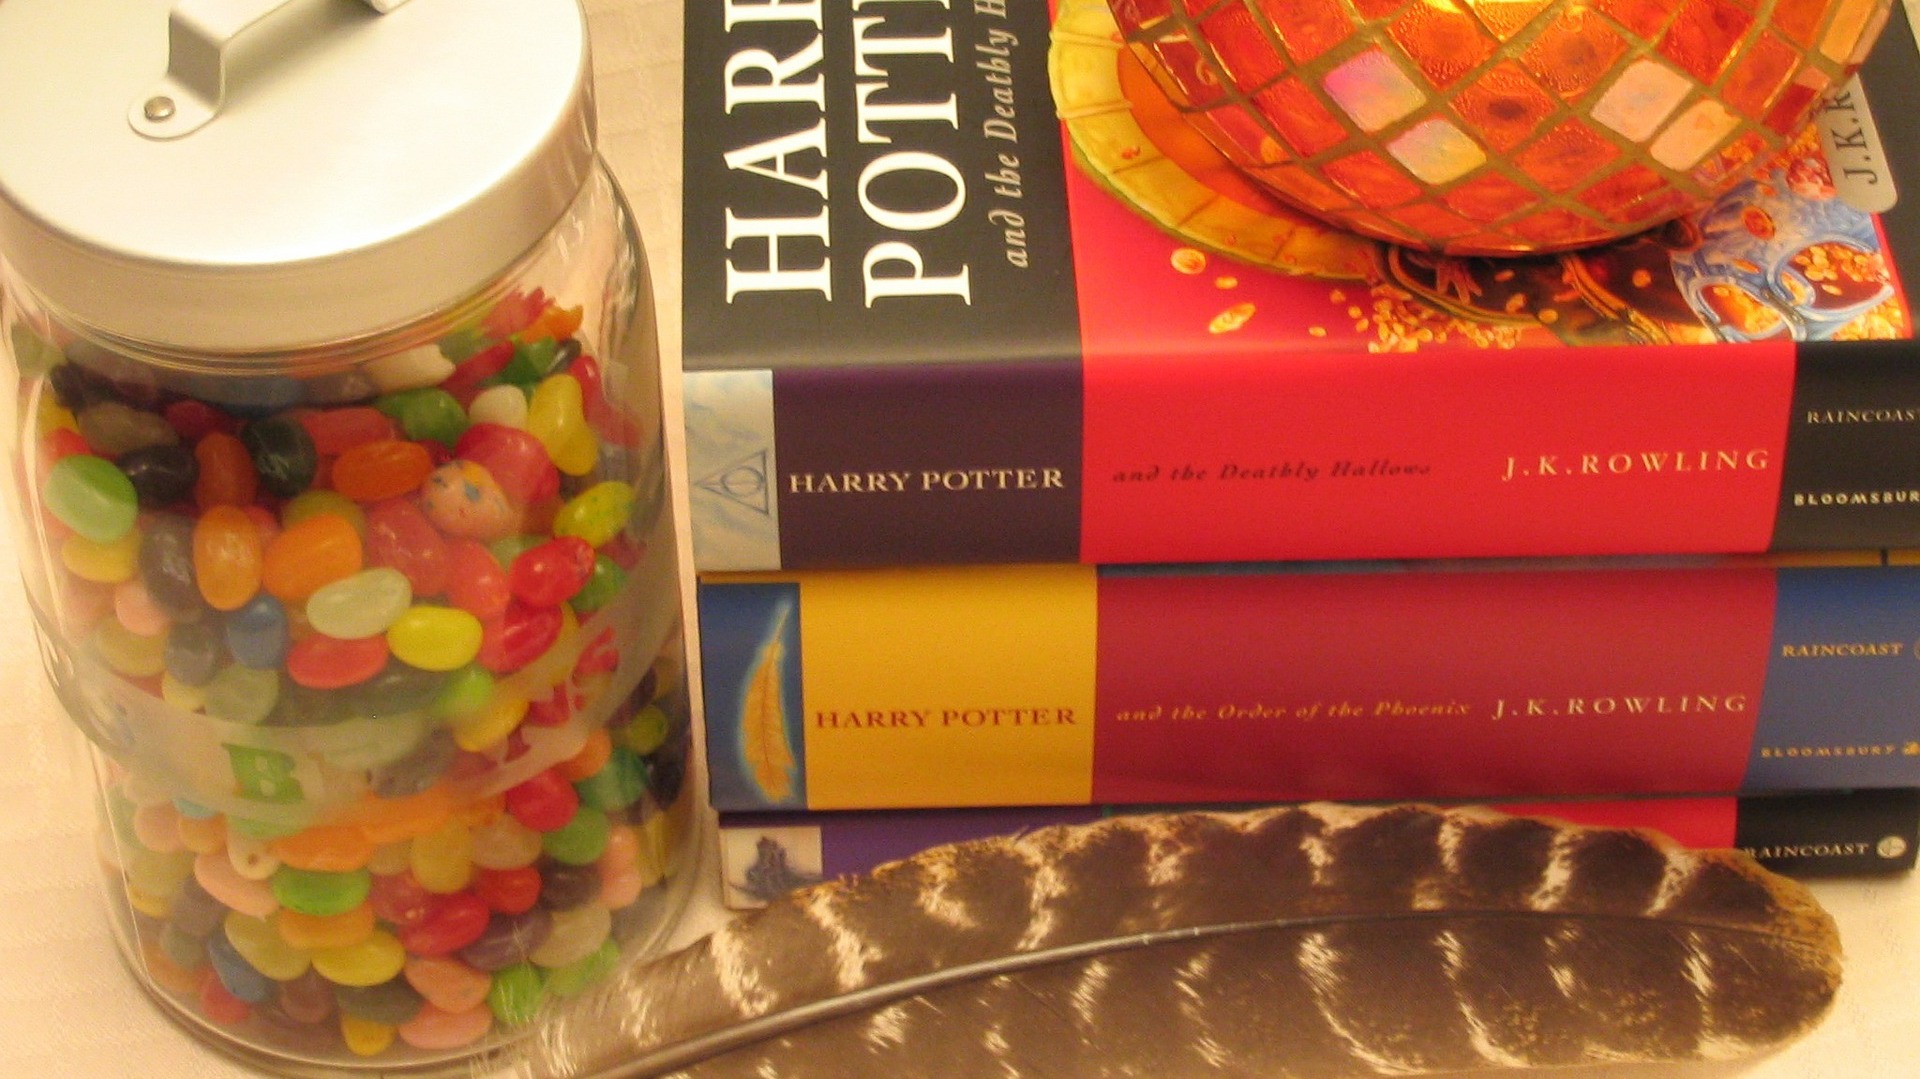 Some of the Harry Potter books, some jelly beans and a feather